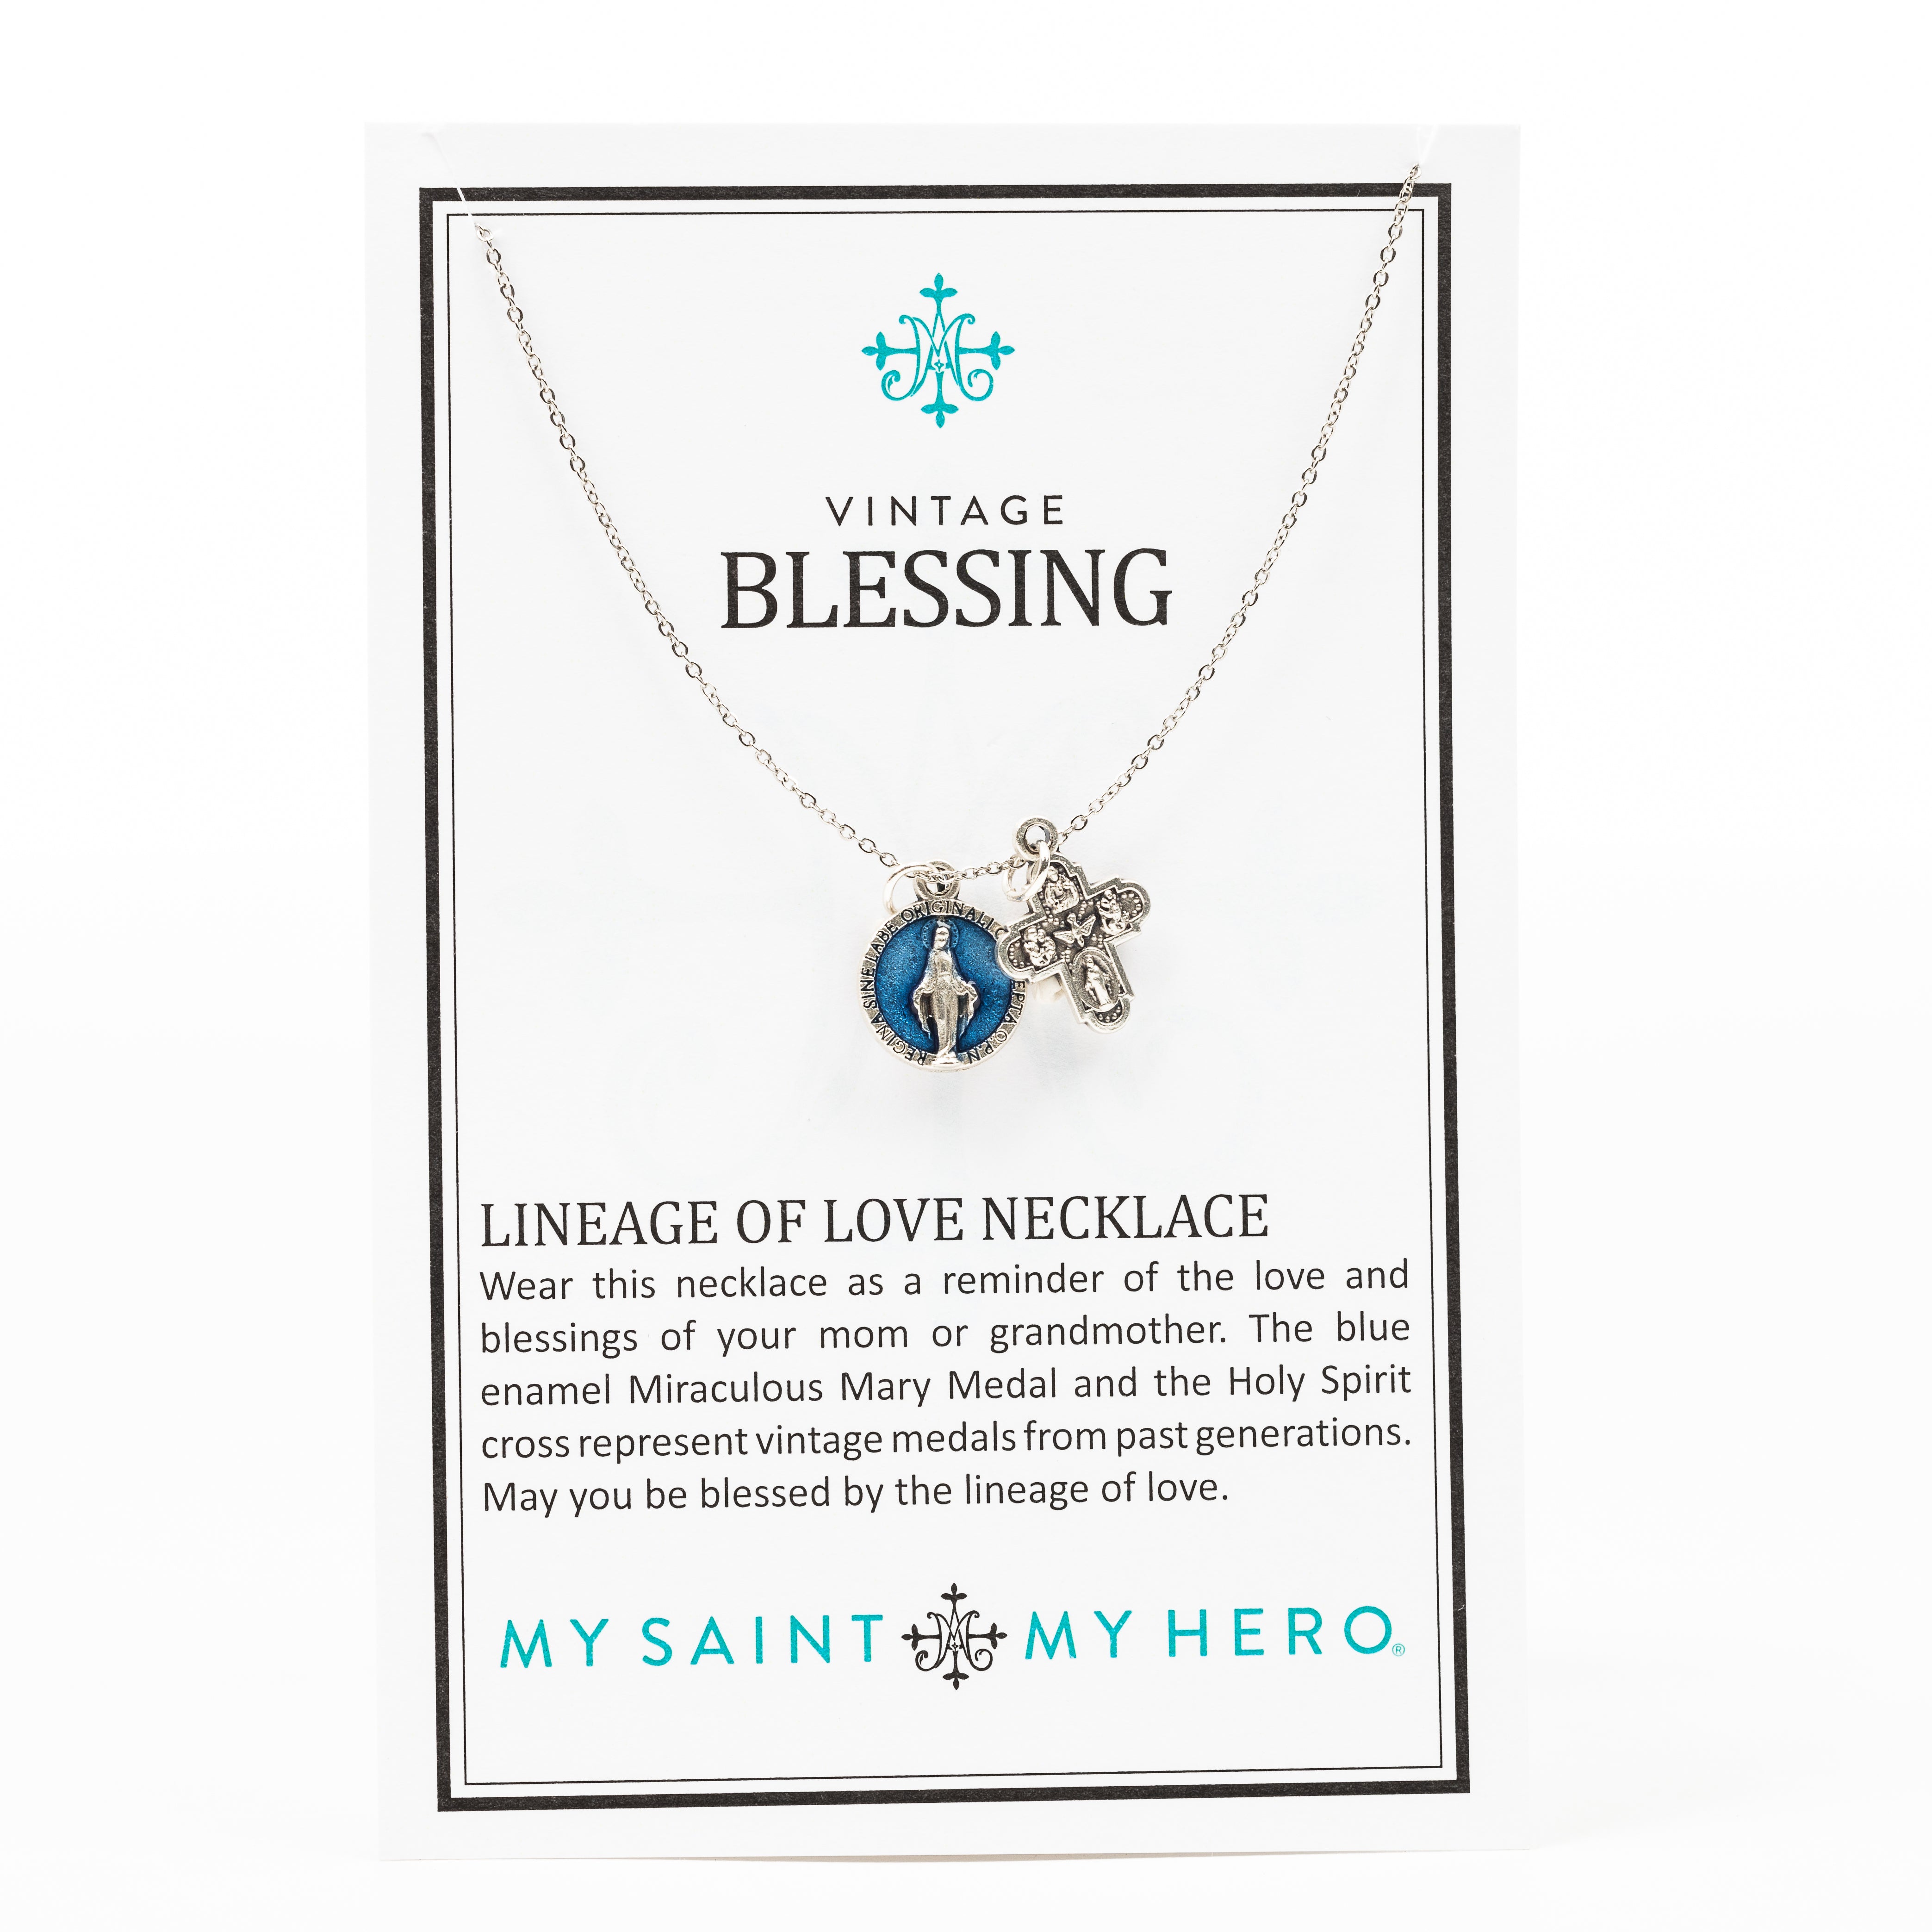 Vintage Blessing Lineage of Love Necklace by My Saint My Hero